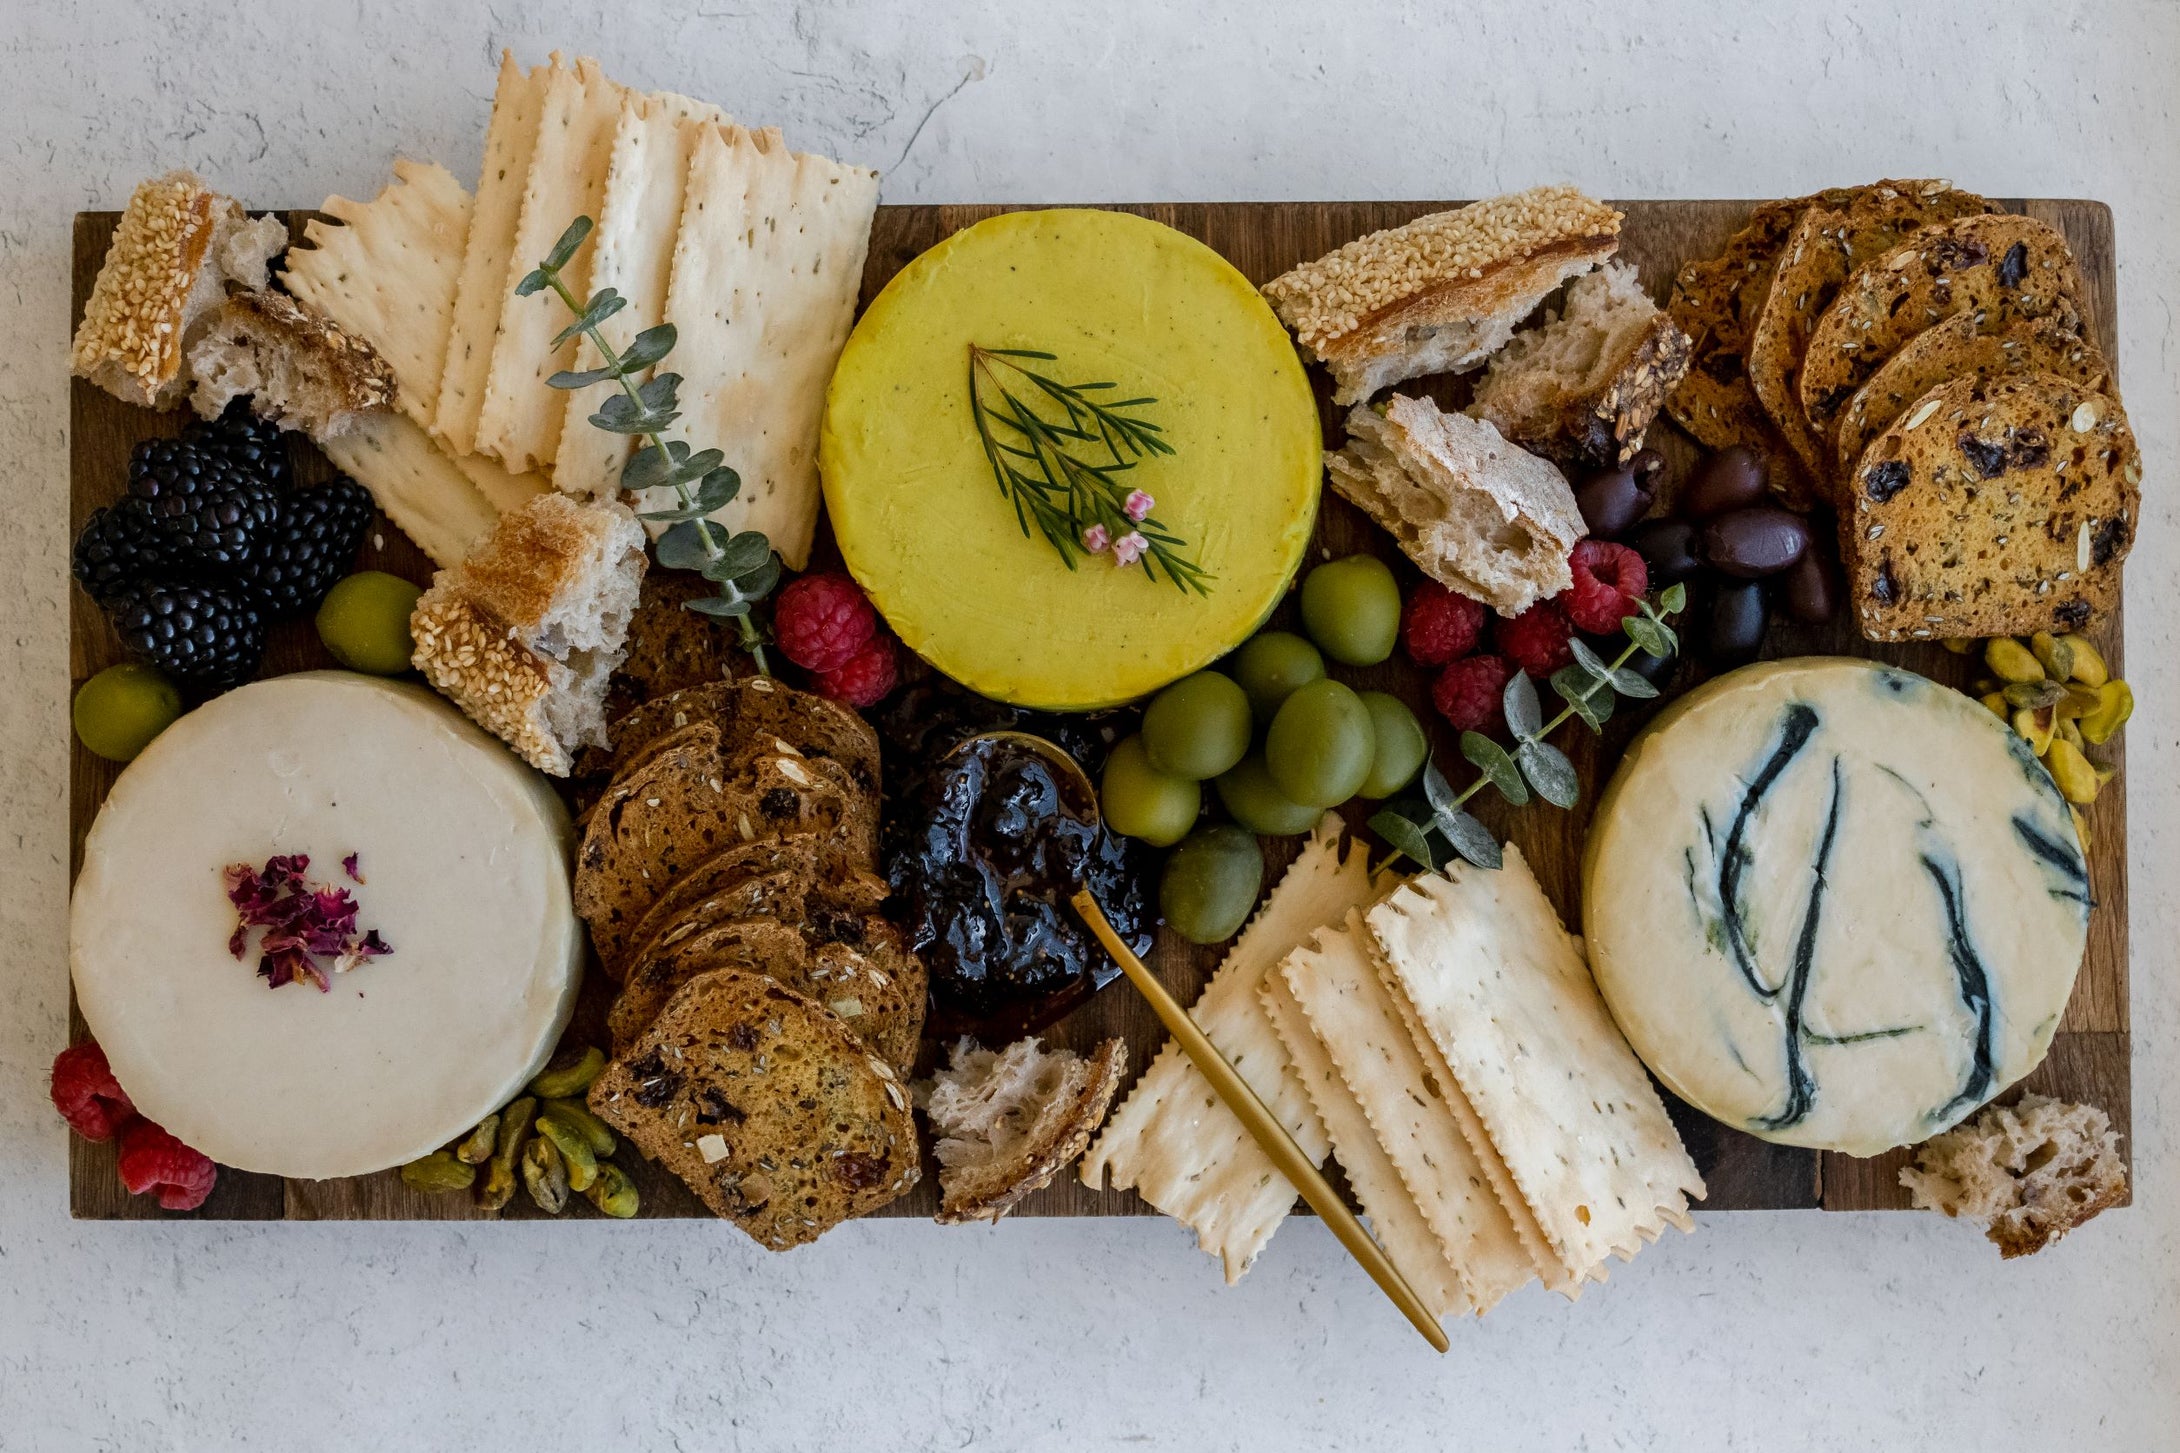 Bountiful cheese board with condiments, crackers and three cheese wheels seen from above